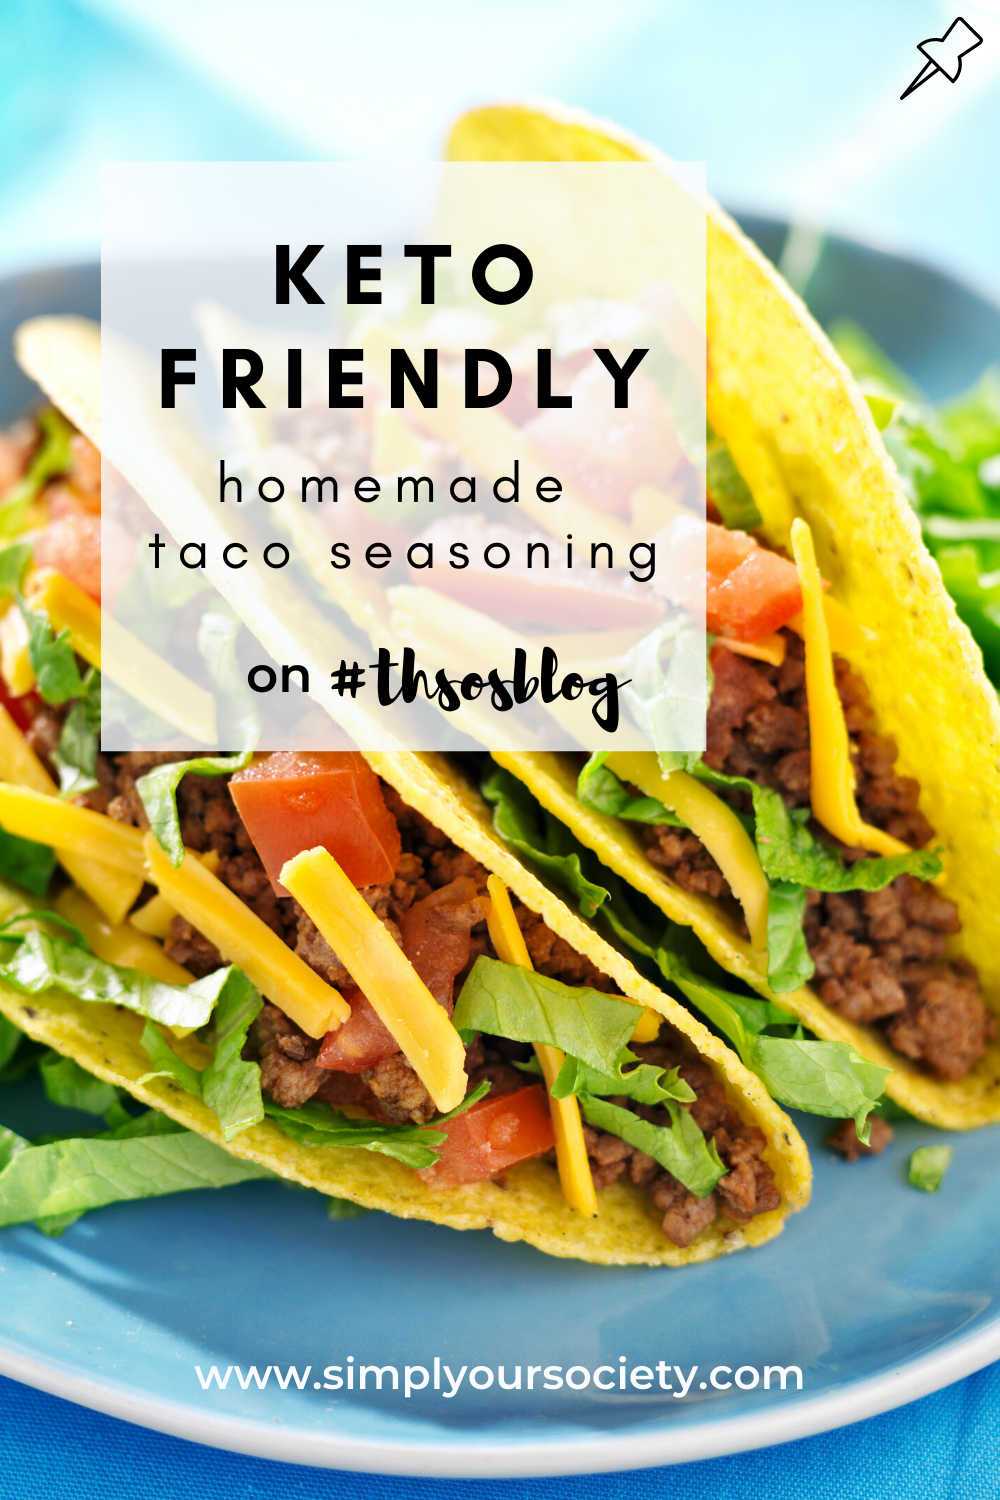 picture of tacos in corn shell with all the fixings-sugar free taco seasoning-keto taco seasoning-is mccormick taco seasoning keto friendly-low carb taco-taco seasoning recipe-homemade taco seasoning-keto taco seasoning